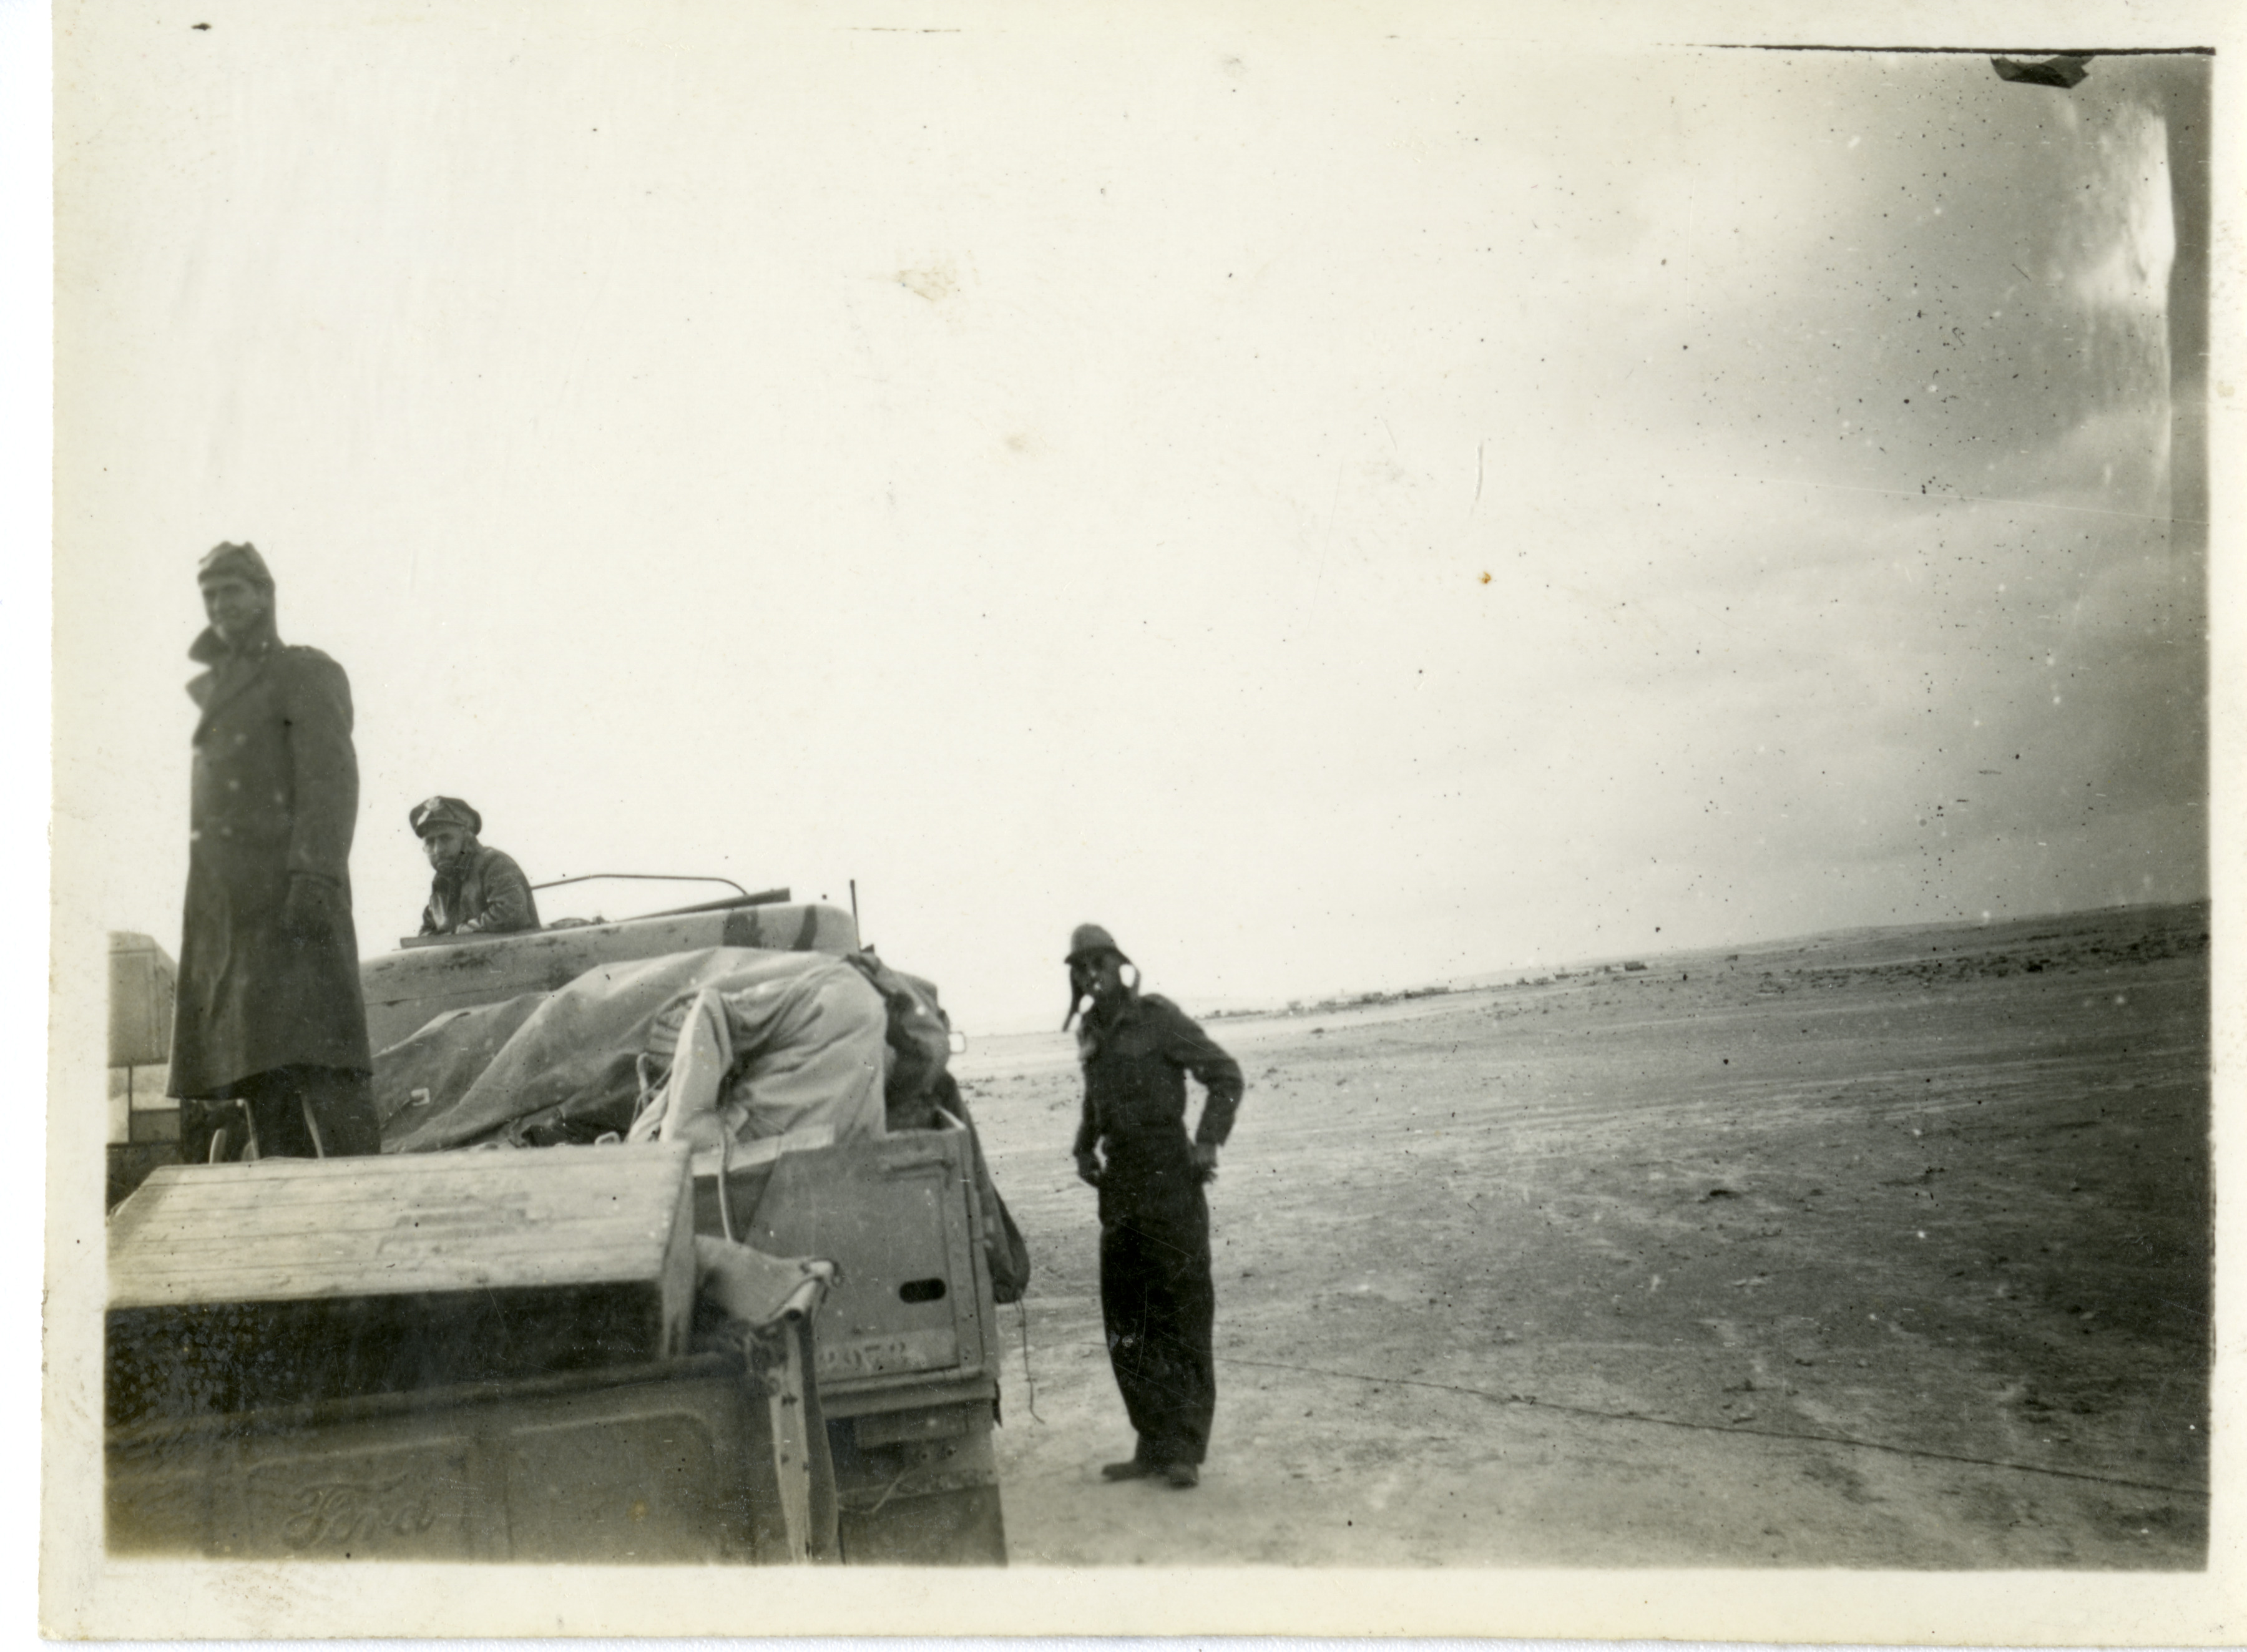 United States airmen with a truck in a desert in North Africa, 1942-43 ...